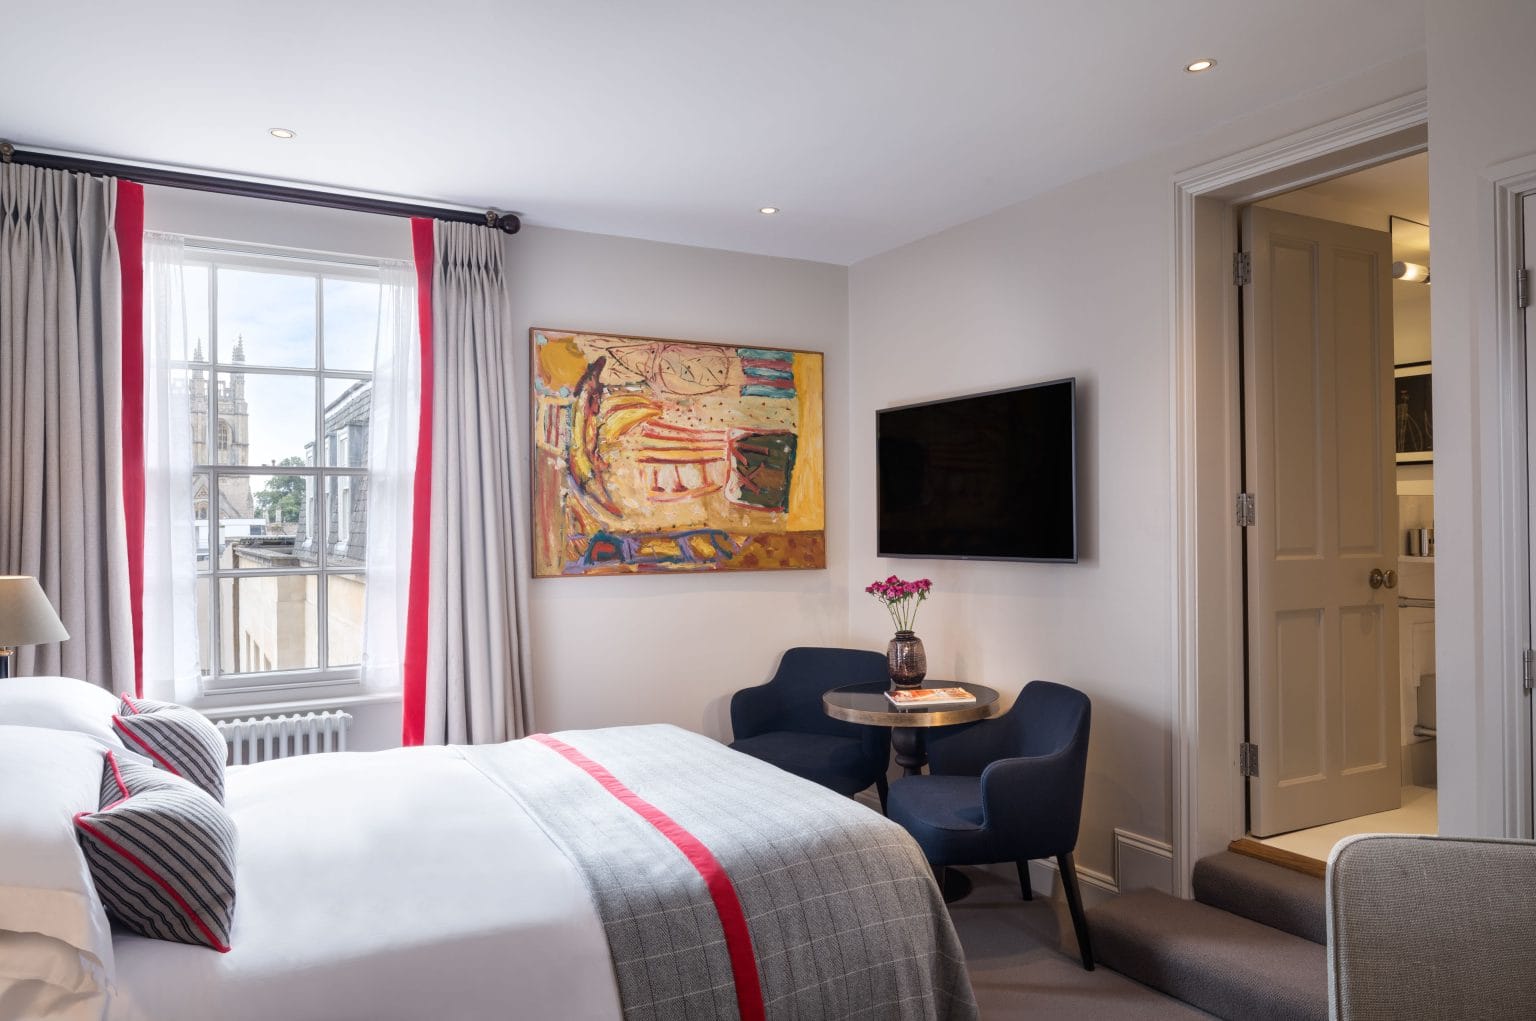 0001 - 2017 - Old Bank Hotel - Oxford - High Res - Bedroom Small Double - Web Hero